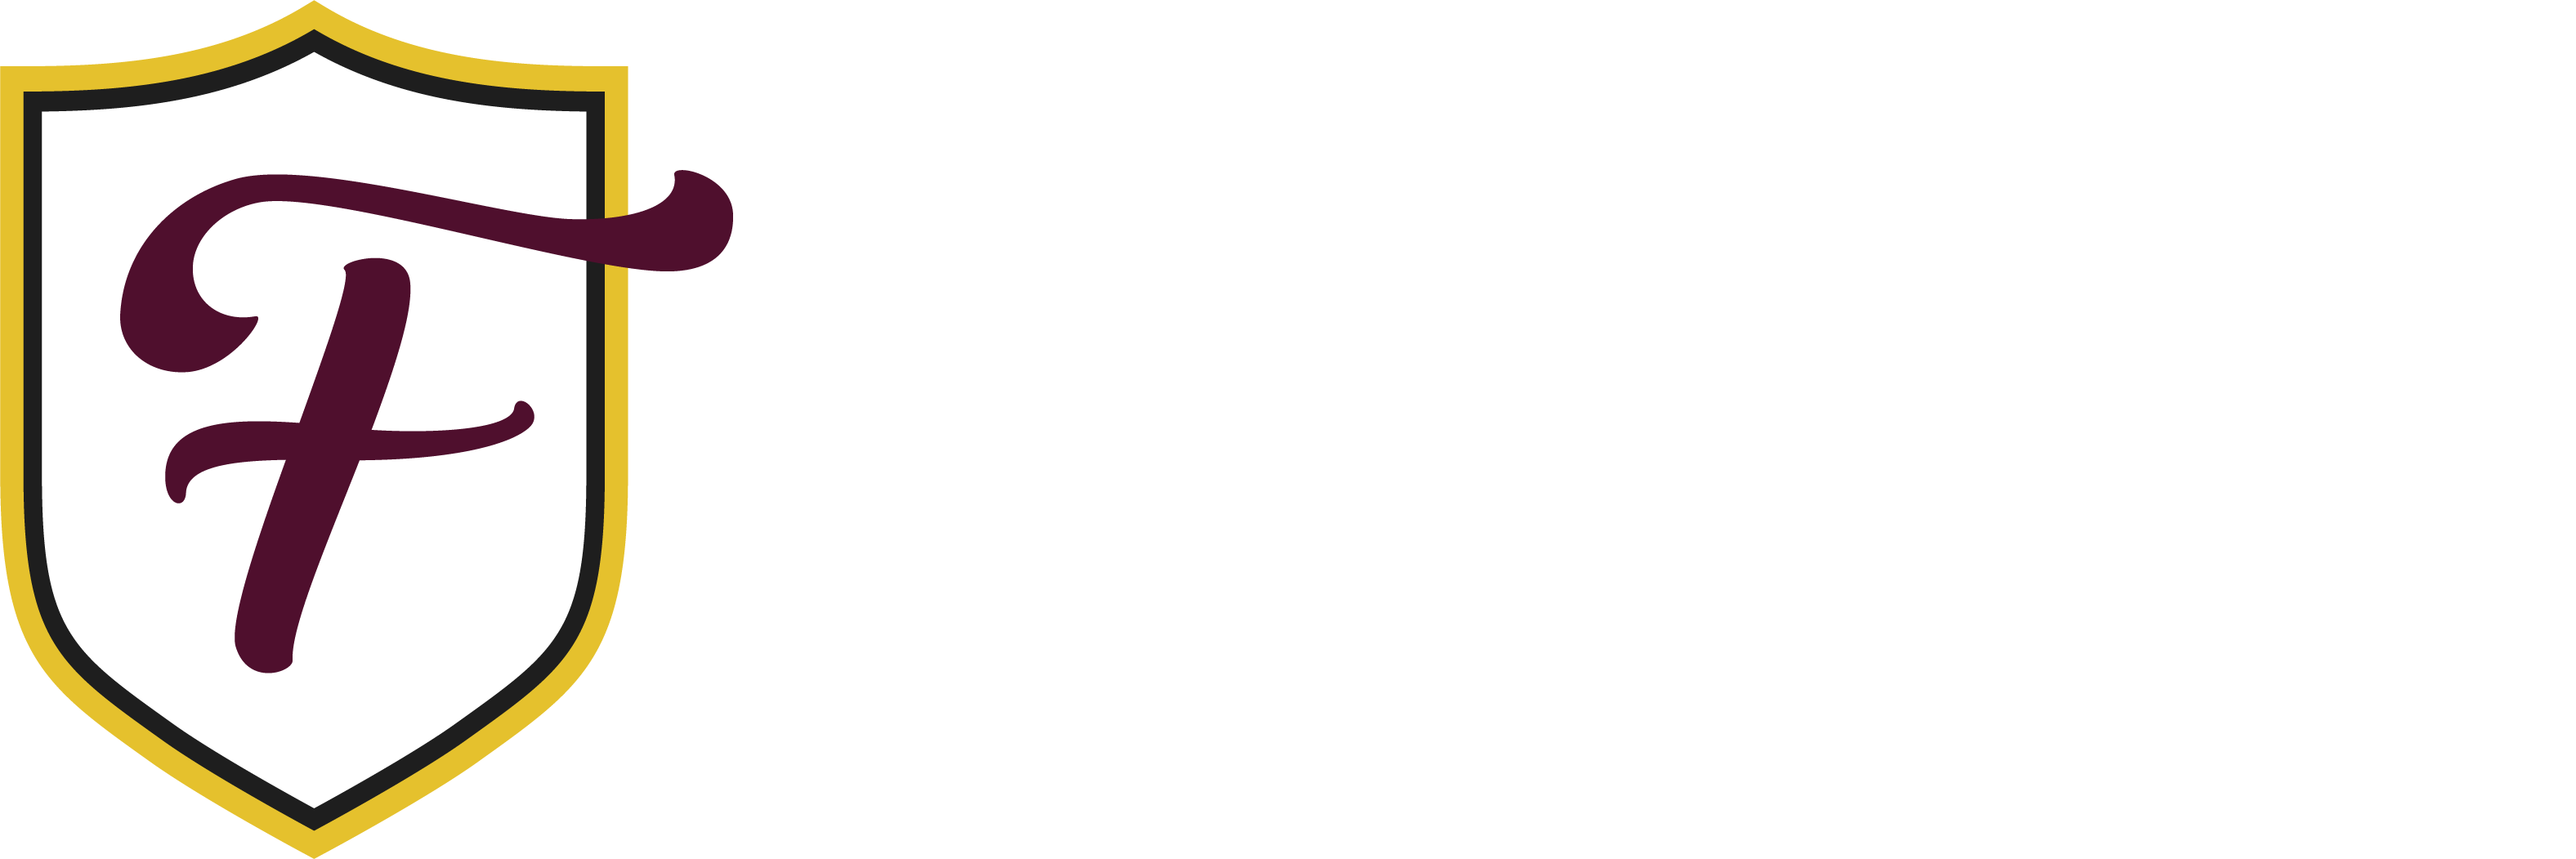 ForbesMgt Logos-color white text